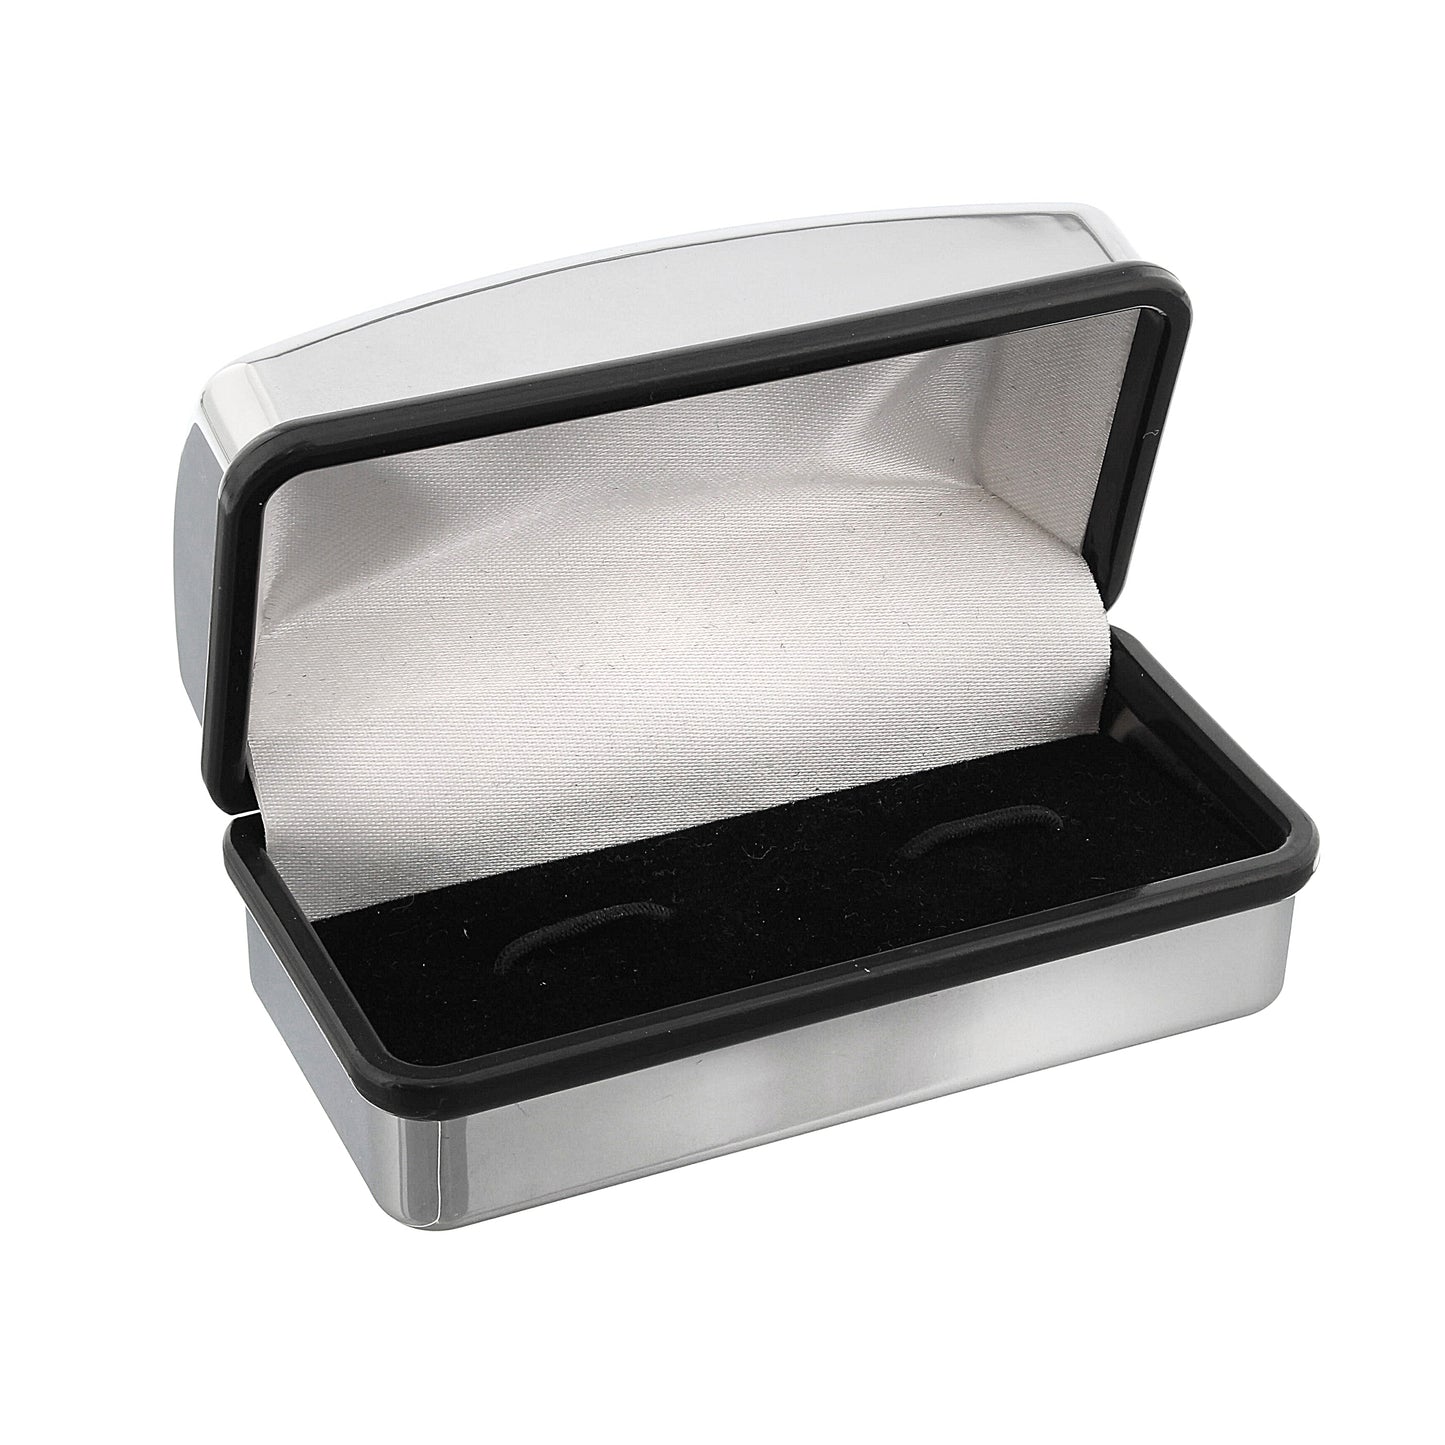 Personalised Decorative Wedding Father of the Bride Cufflink Box - Personalise It!